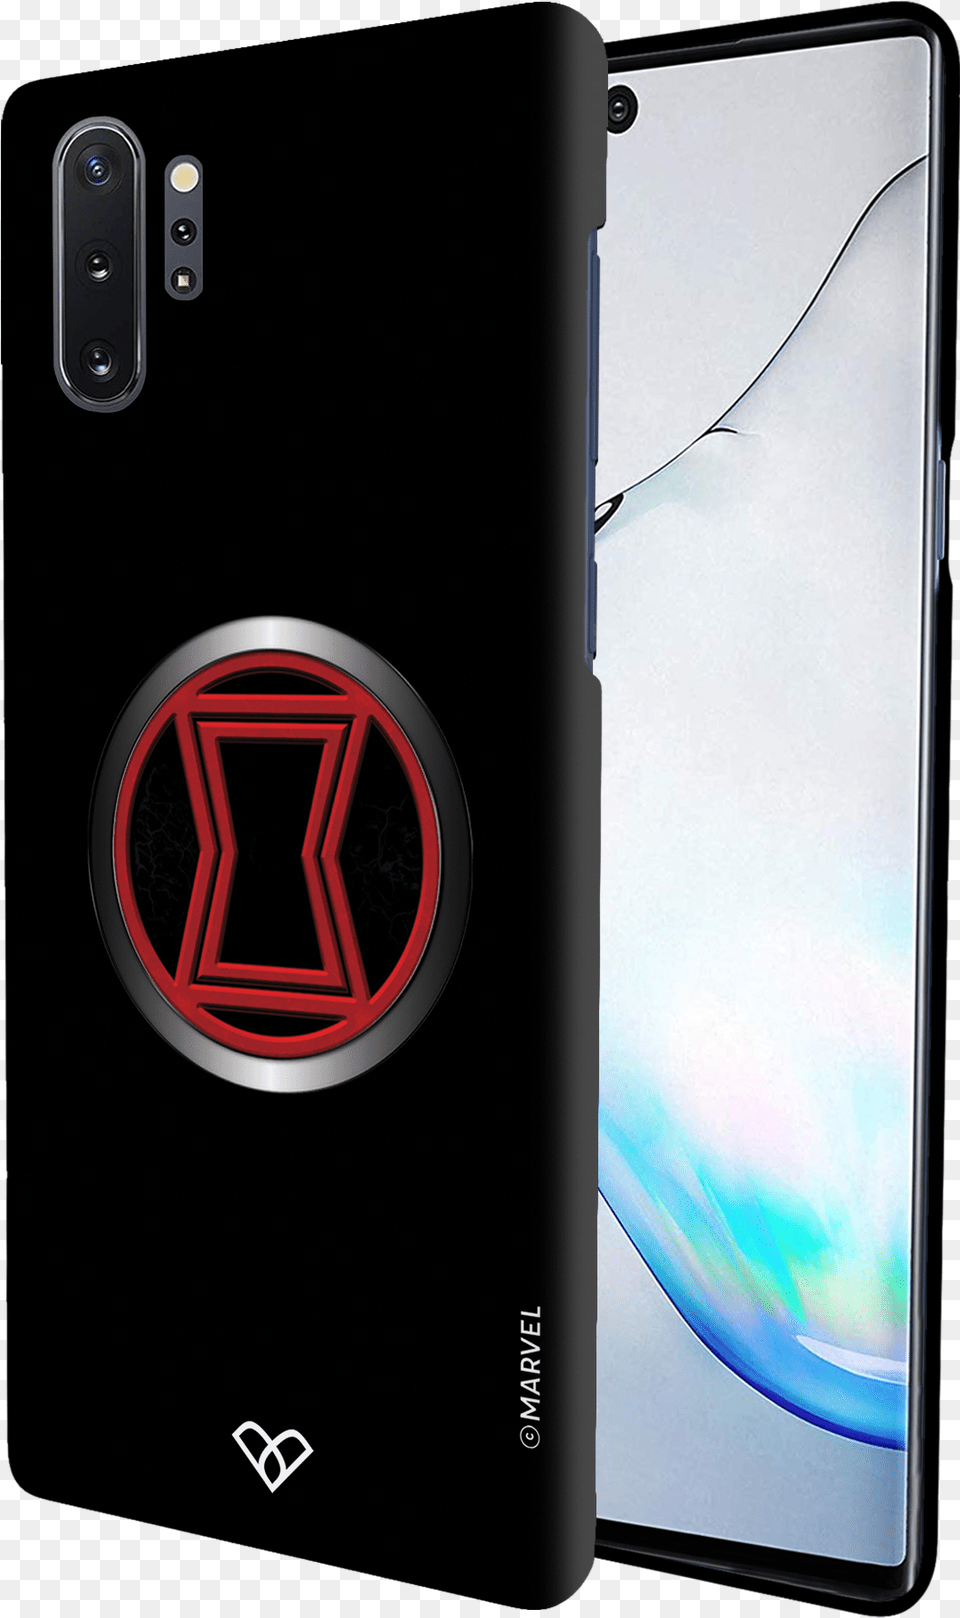 Black Widow Emblem Slim Case And Cover For Galaxy Note 10 Plus Smartphone, Electronics, Mobile Phone, Phone Png Image